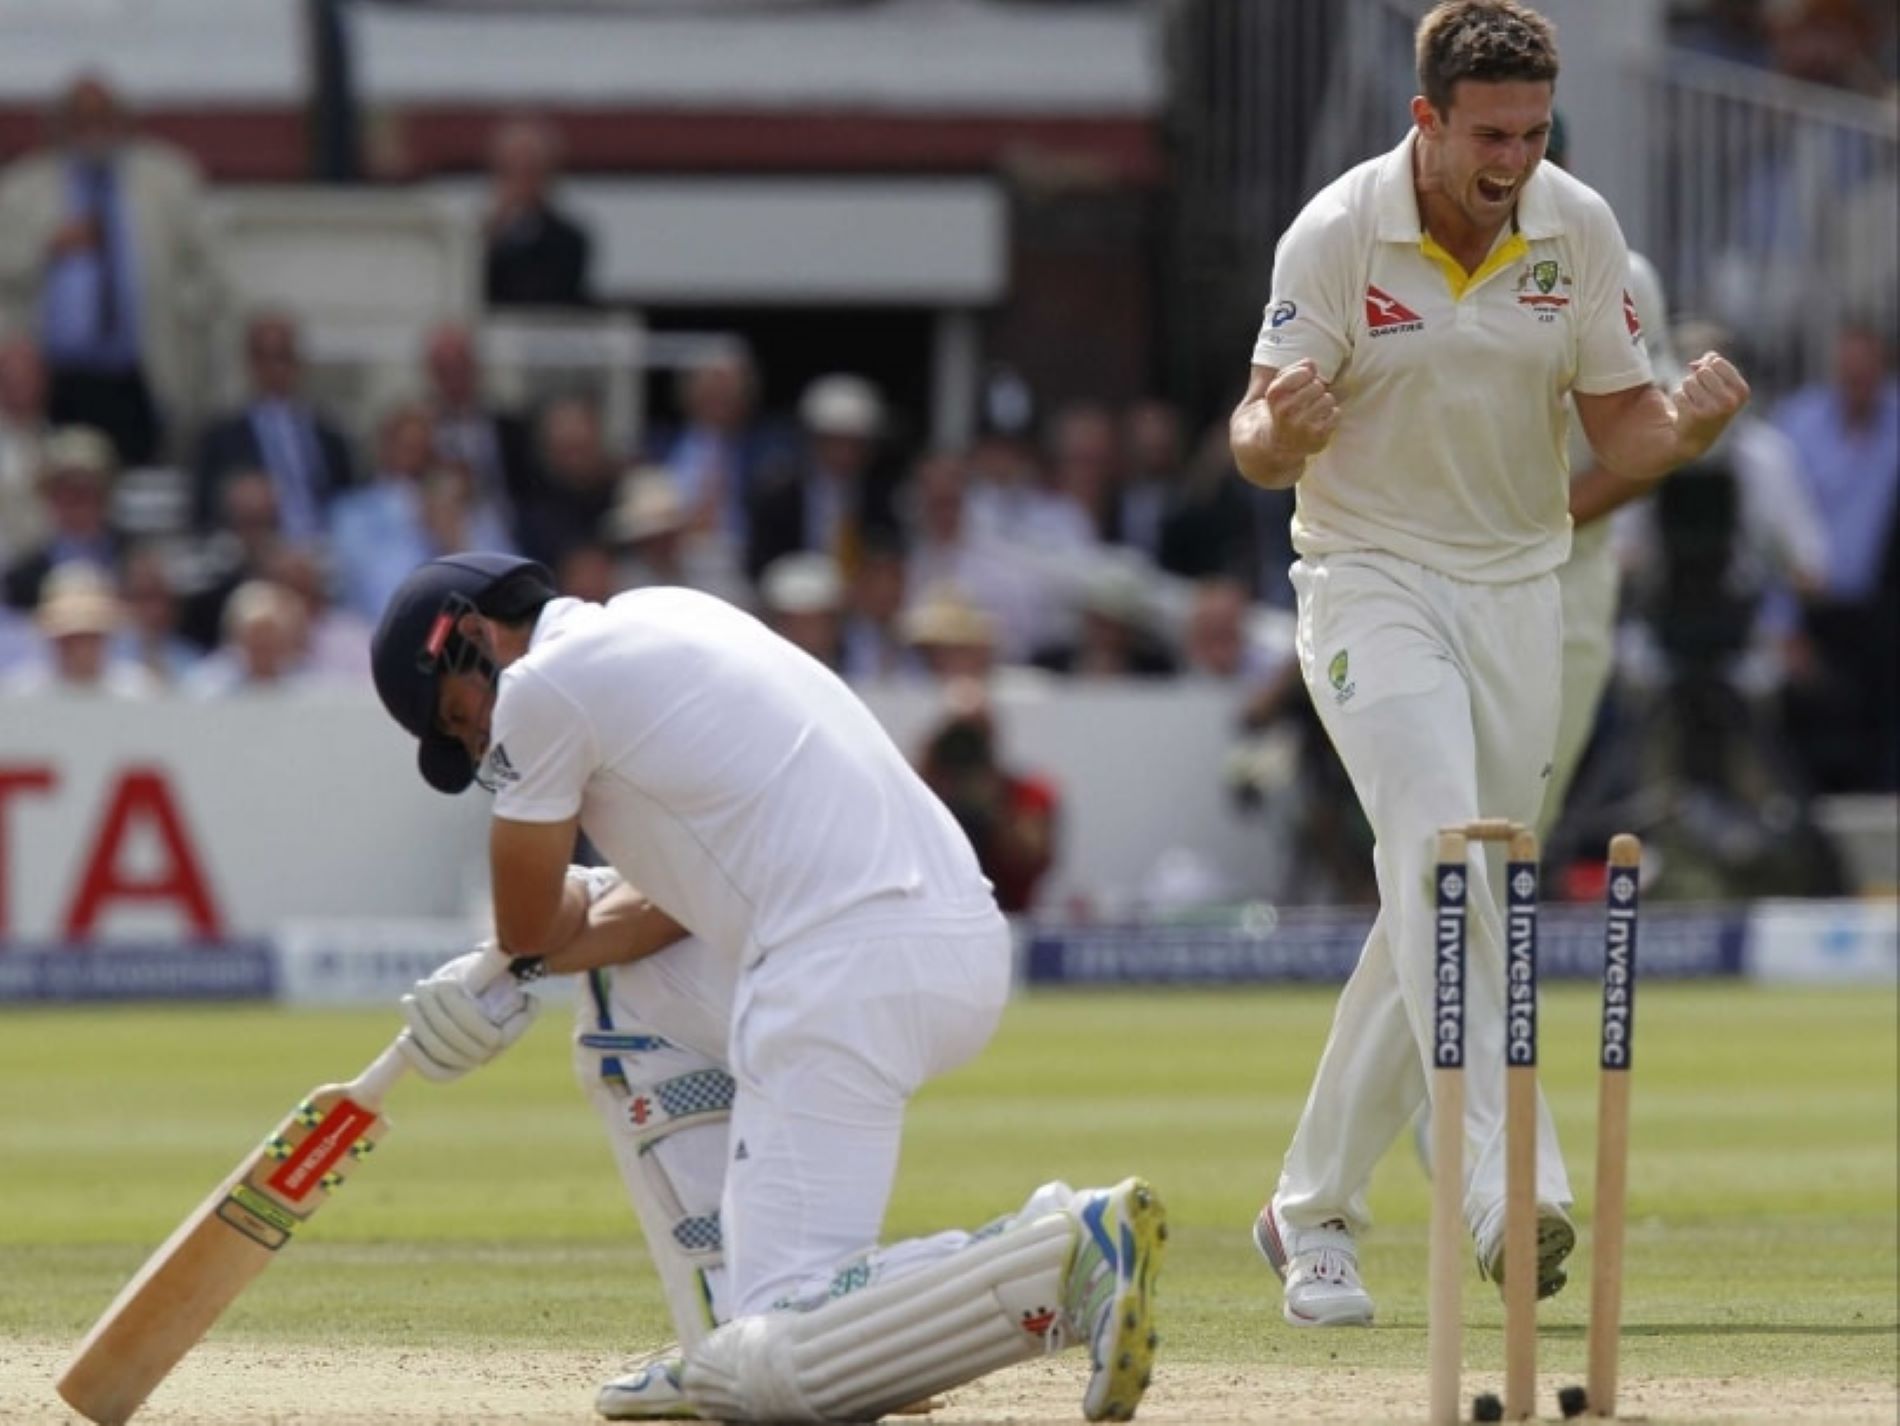 Cook&#039;s dismissal for 96 was the final nail in the coffin for England.